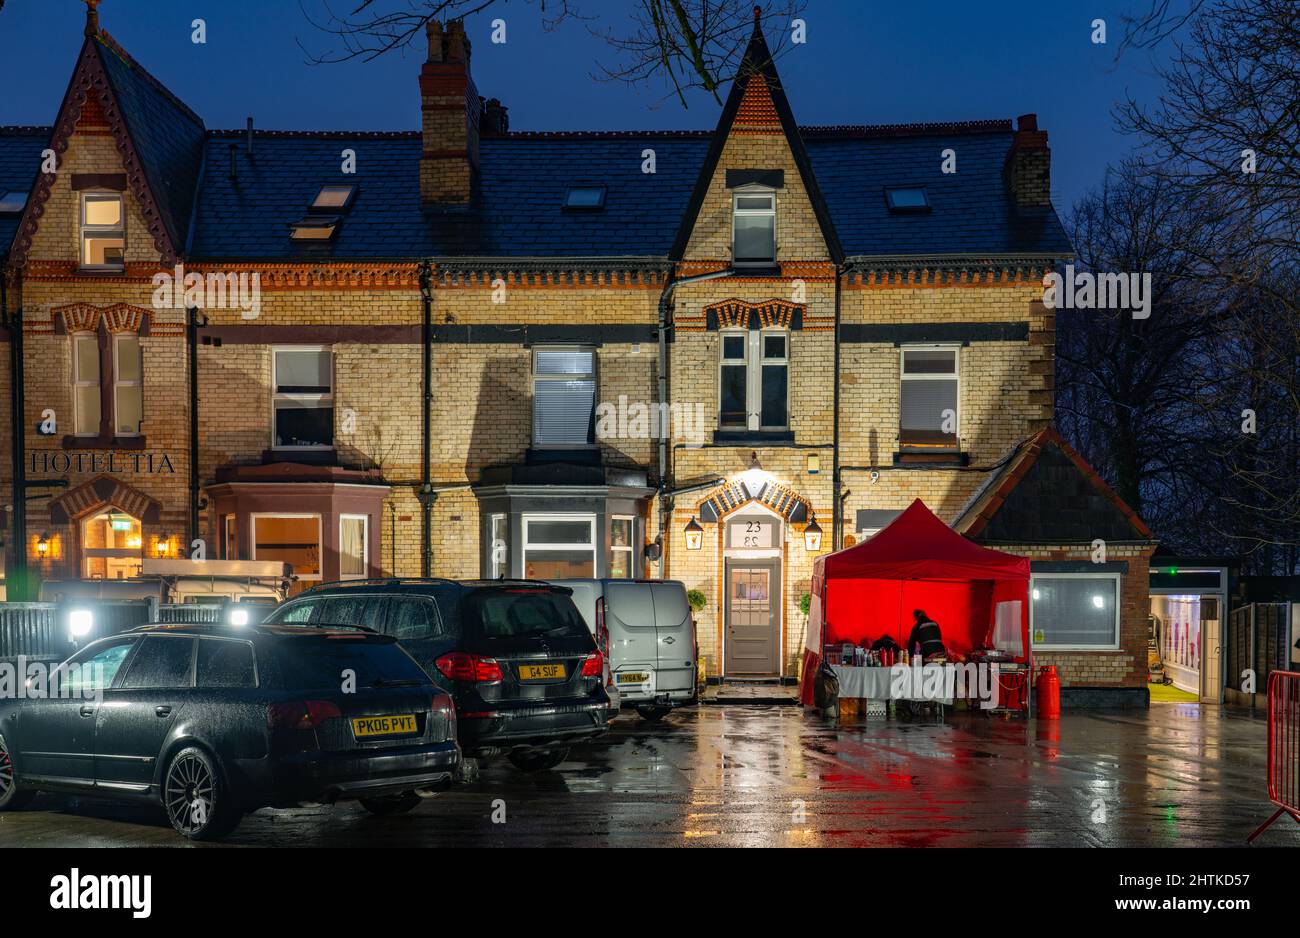 Hotel Anfield, a Liverpool Football Club themed Hotel. Image taken in December 2021. Stock Photo